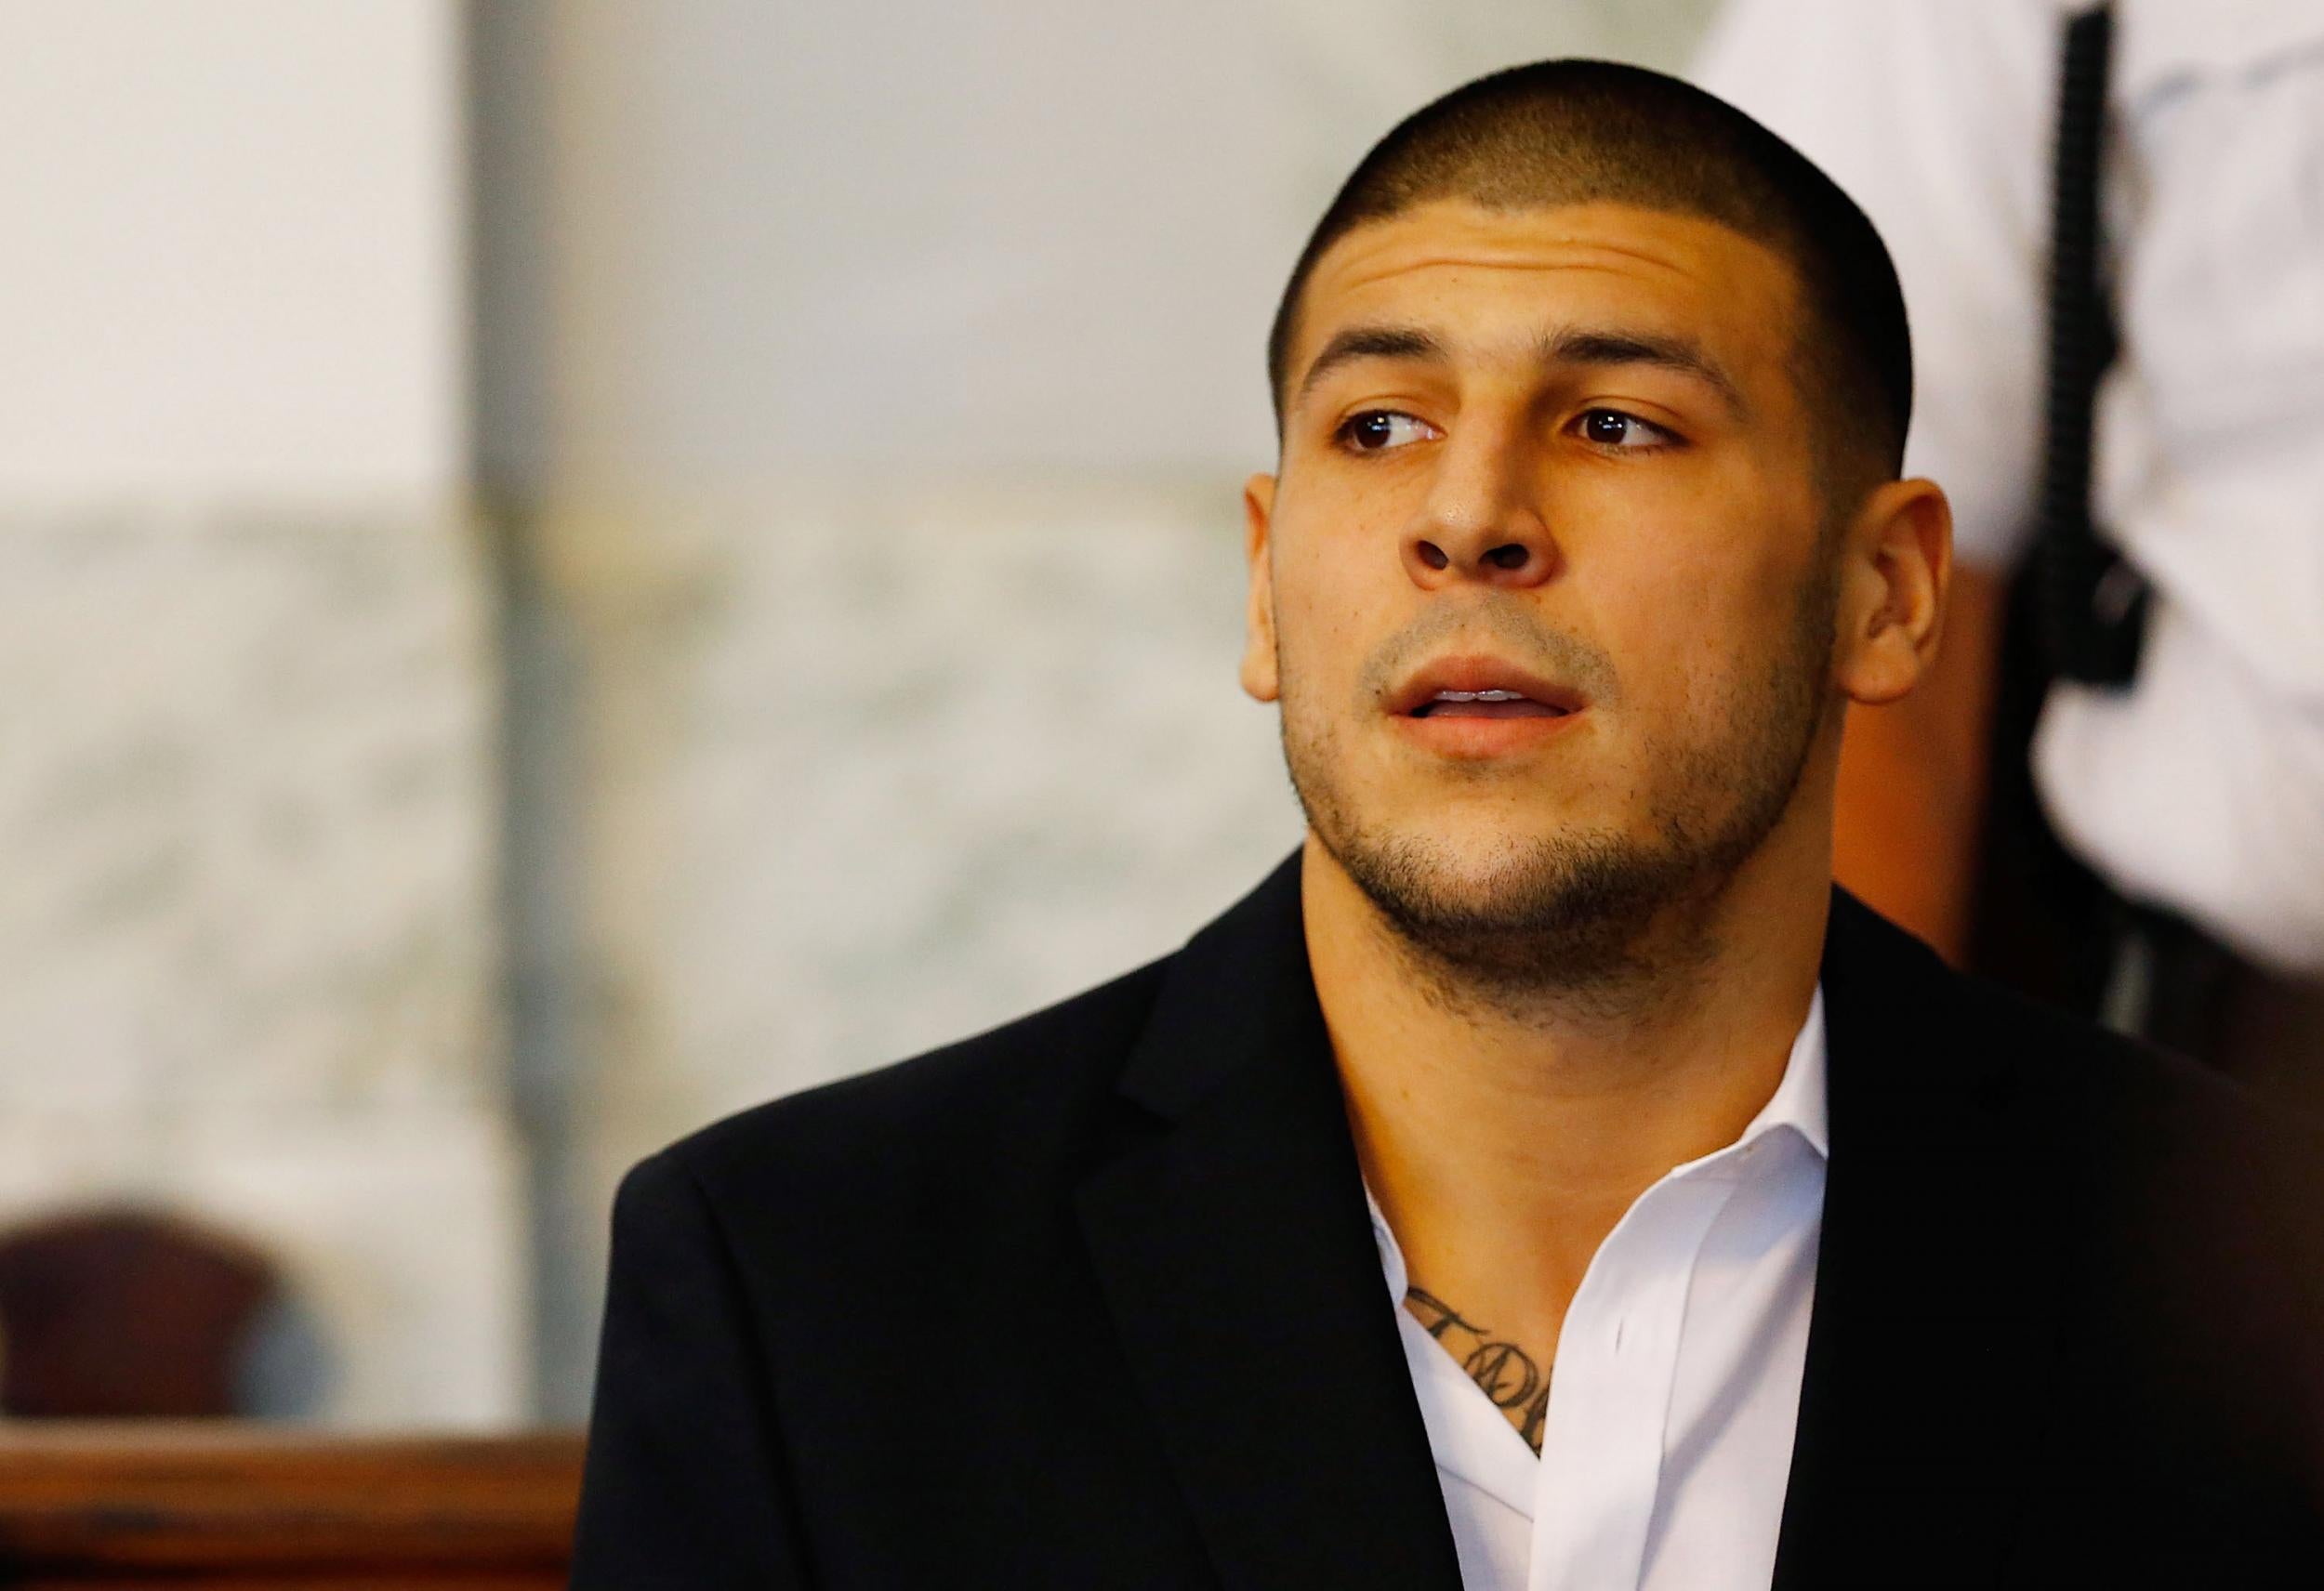 Ex-NFL player Aaron Hernandez has been acquitted of a double murder charge but is serving a life sentence for another murder